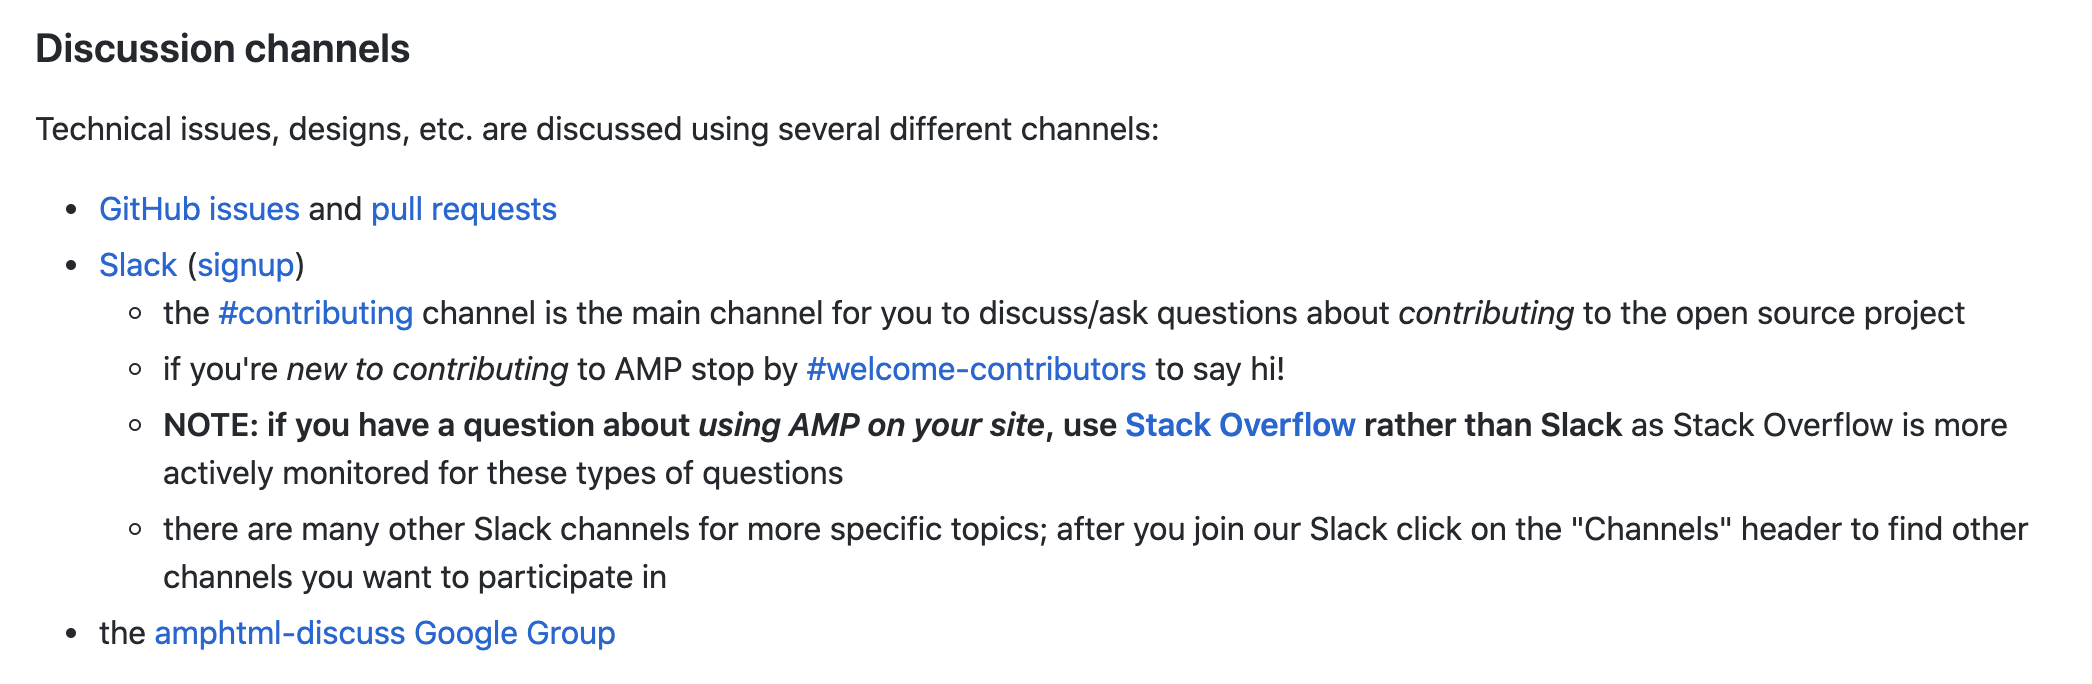 AMP Discussion Channel List - GitHub Issues, Slack, Stack Overflow, amphtml-discuss Google Group